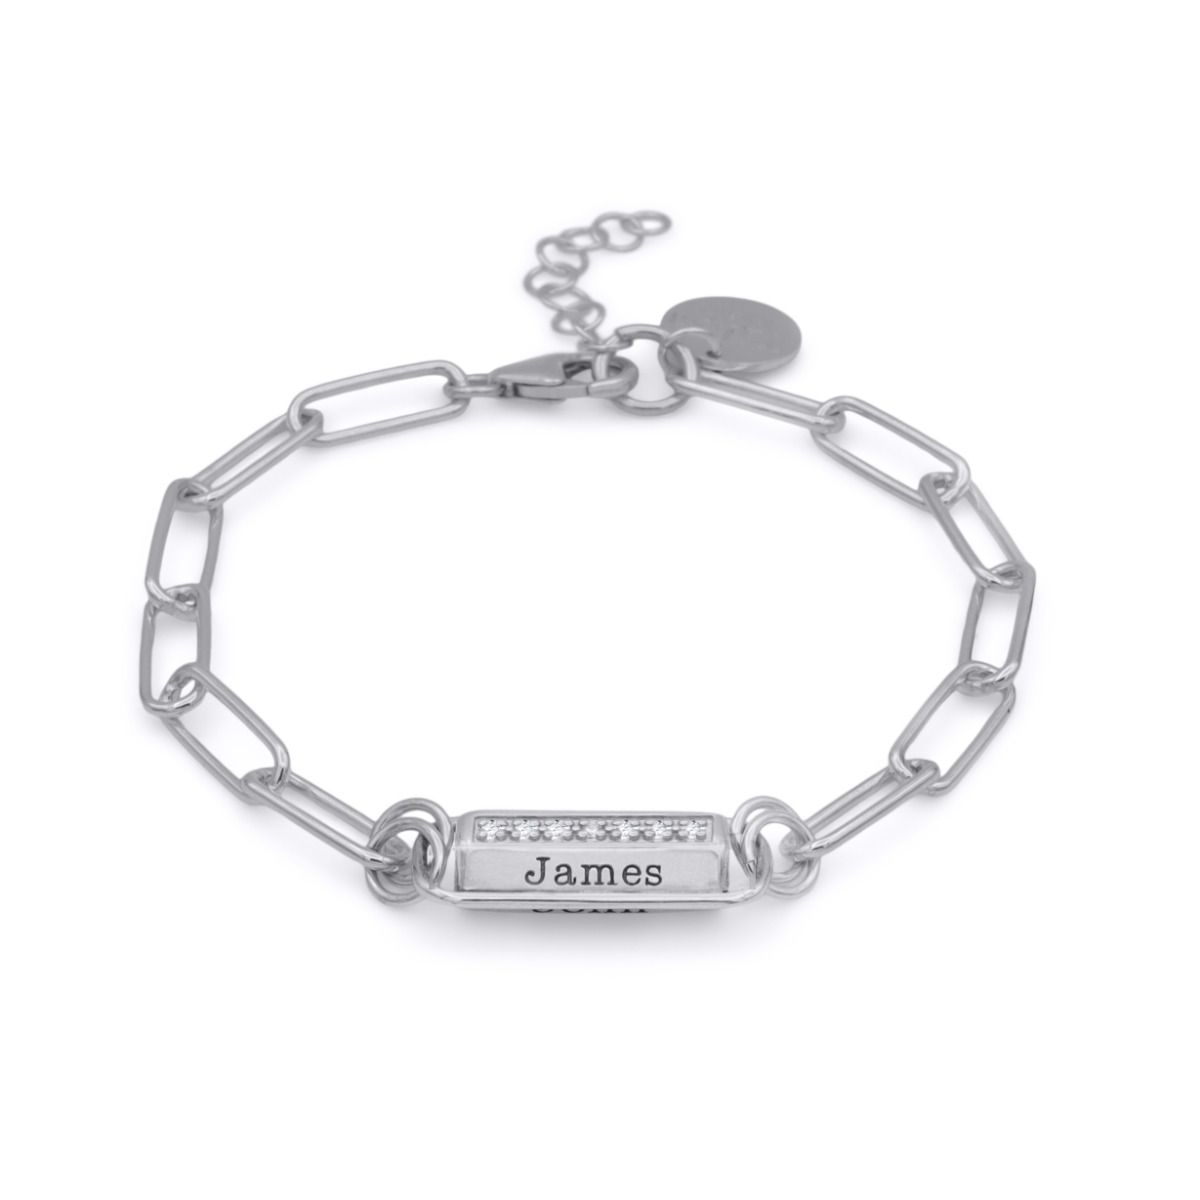 Link Chain Hexa Bar Bracelet with Names and White Crystals - Gifts For Her